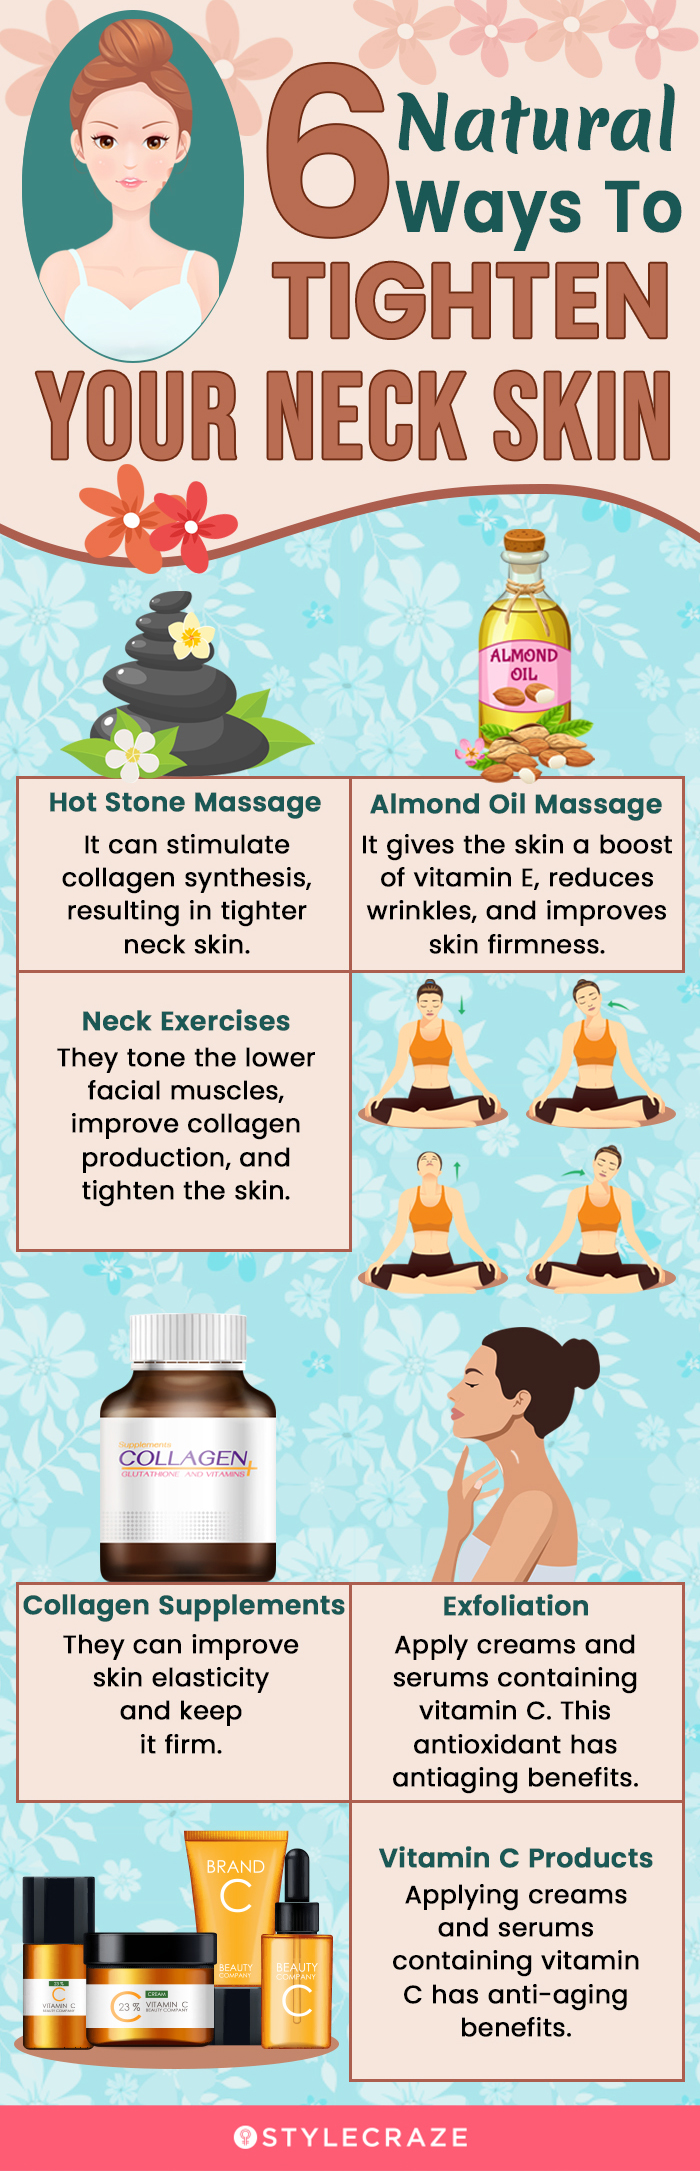 6 natural ways to tighten your neck skin (infographic)